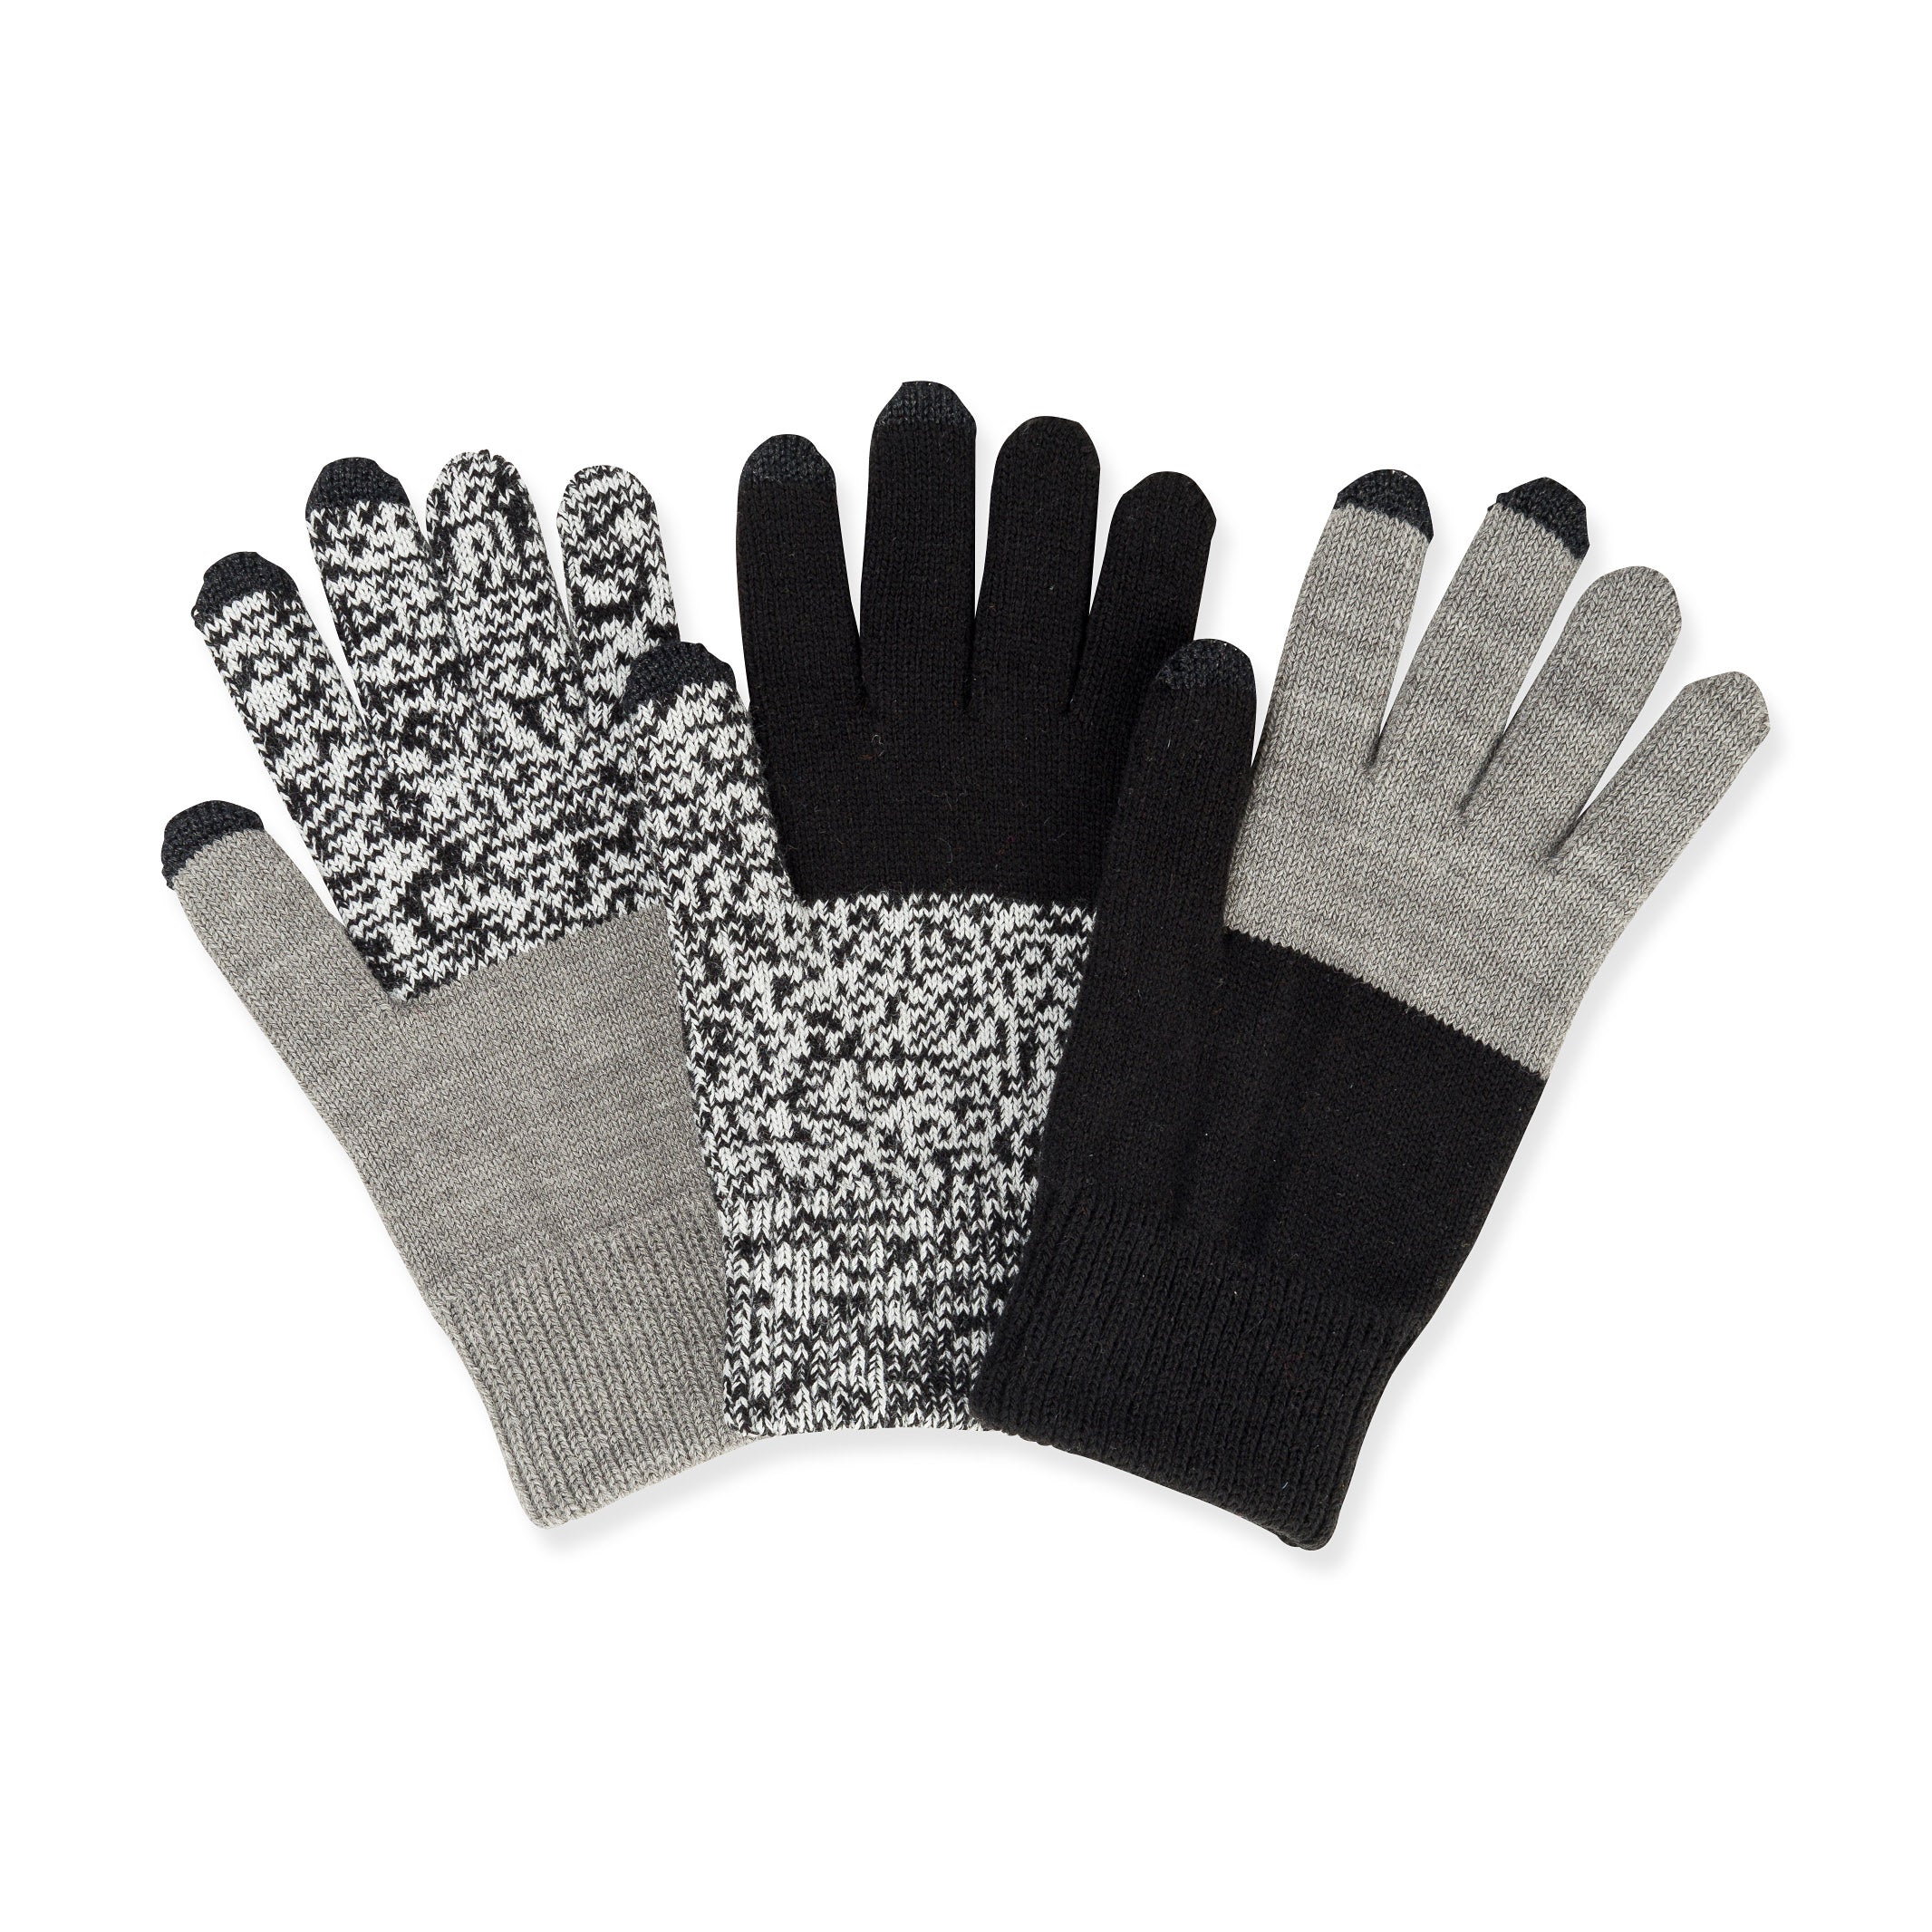 Gray Store Design - & Colorblock Gloves Spare Black a Pair – Touchscreen MoMA